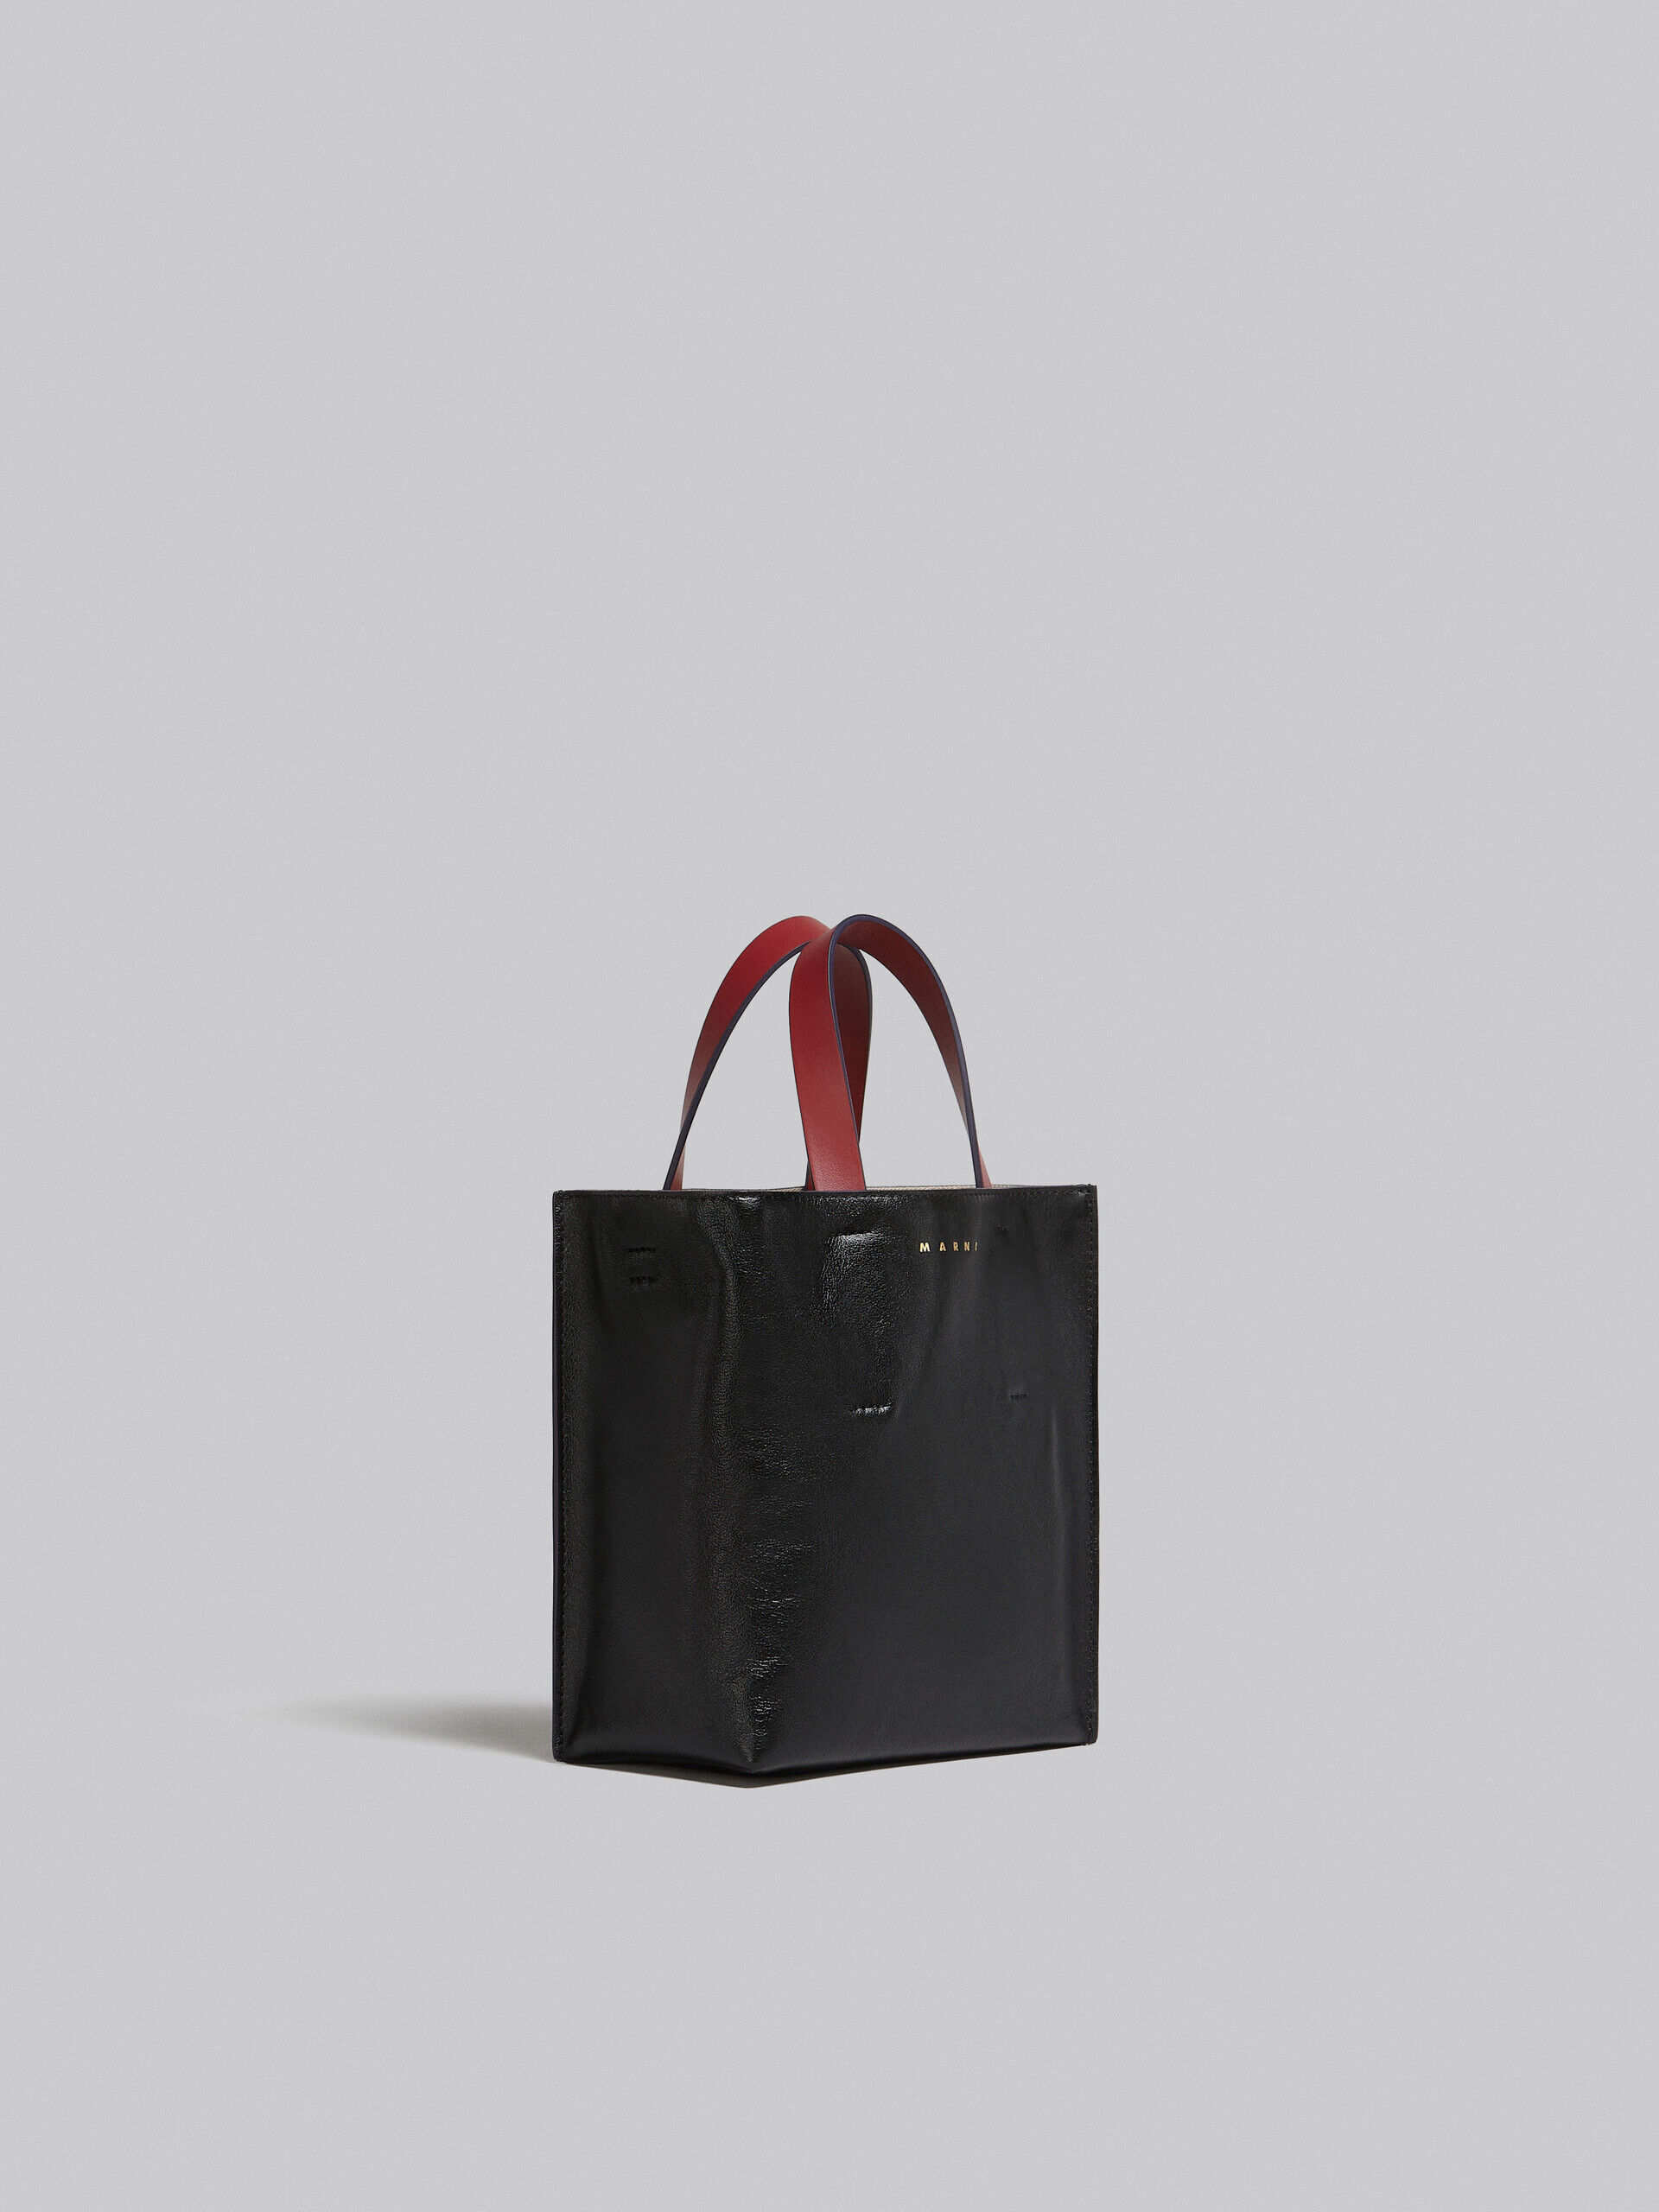 Museo Soft Mini Bag in grey black and red leather | Marni